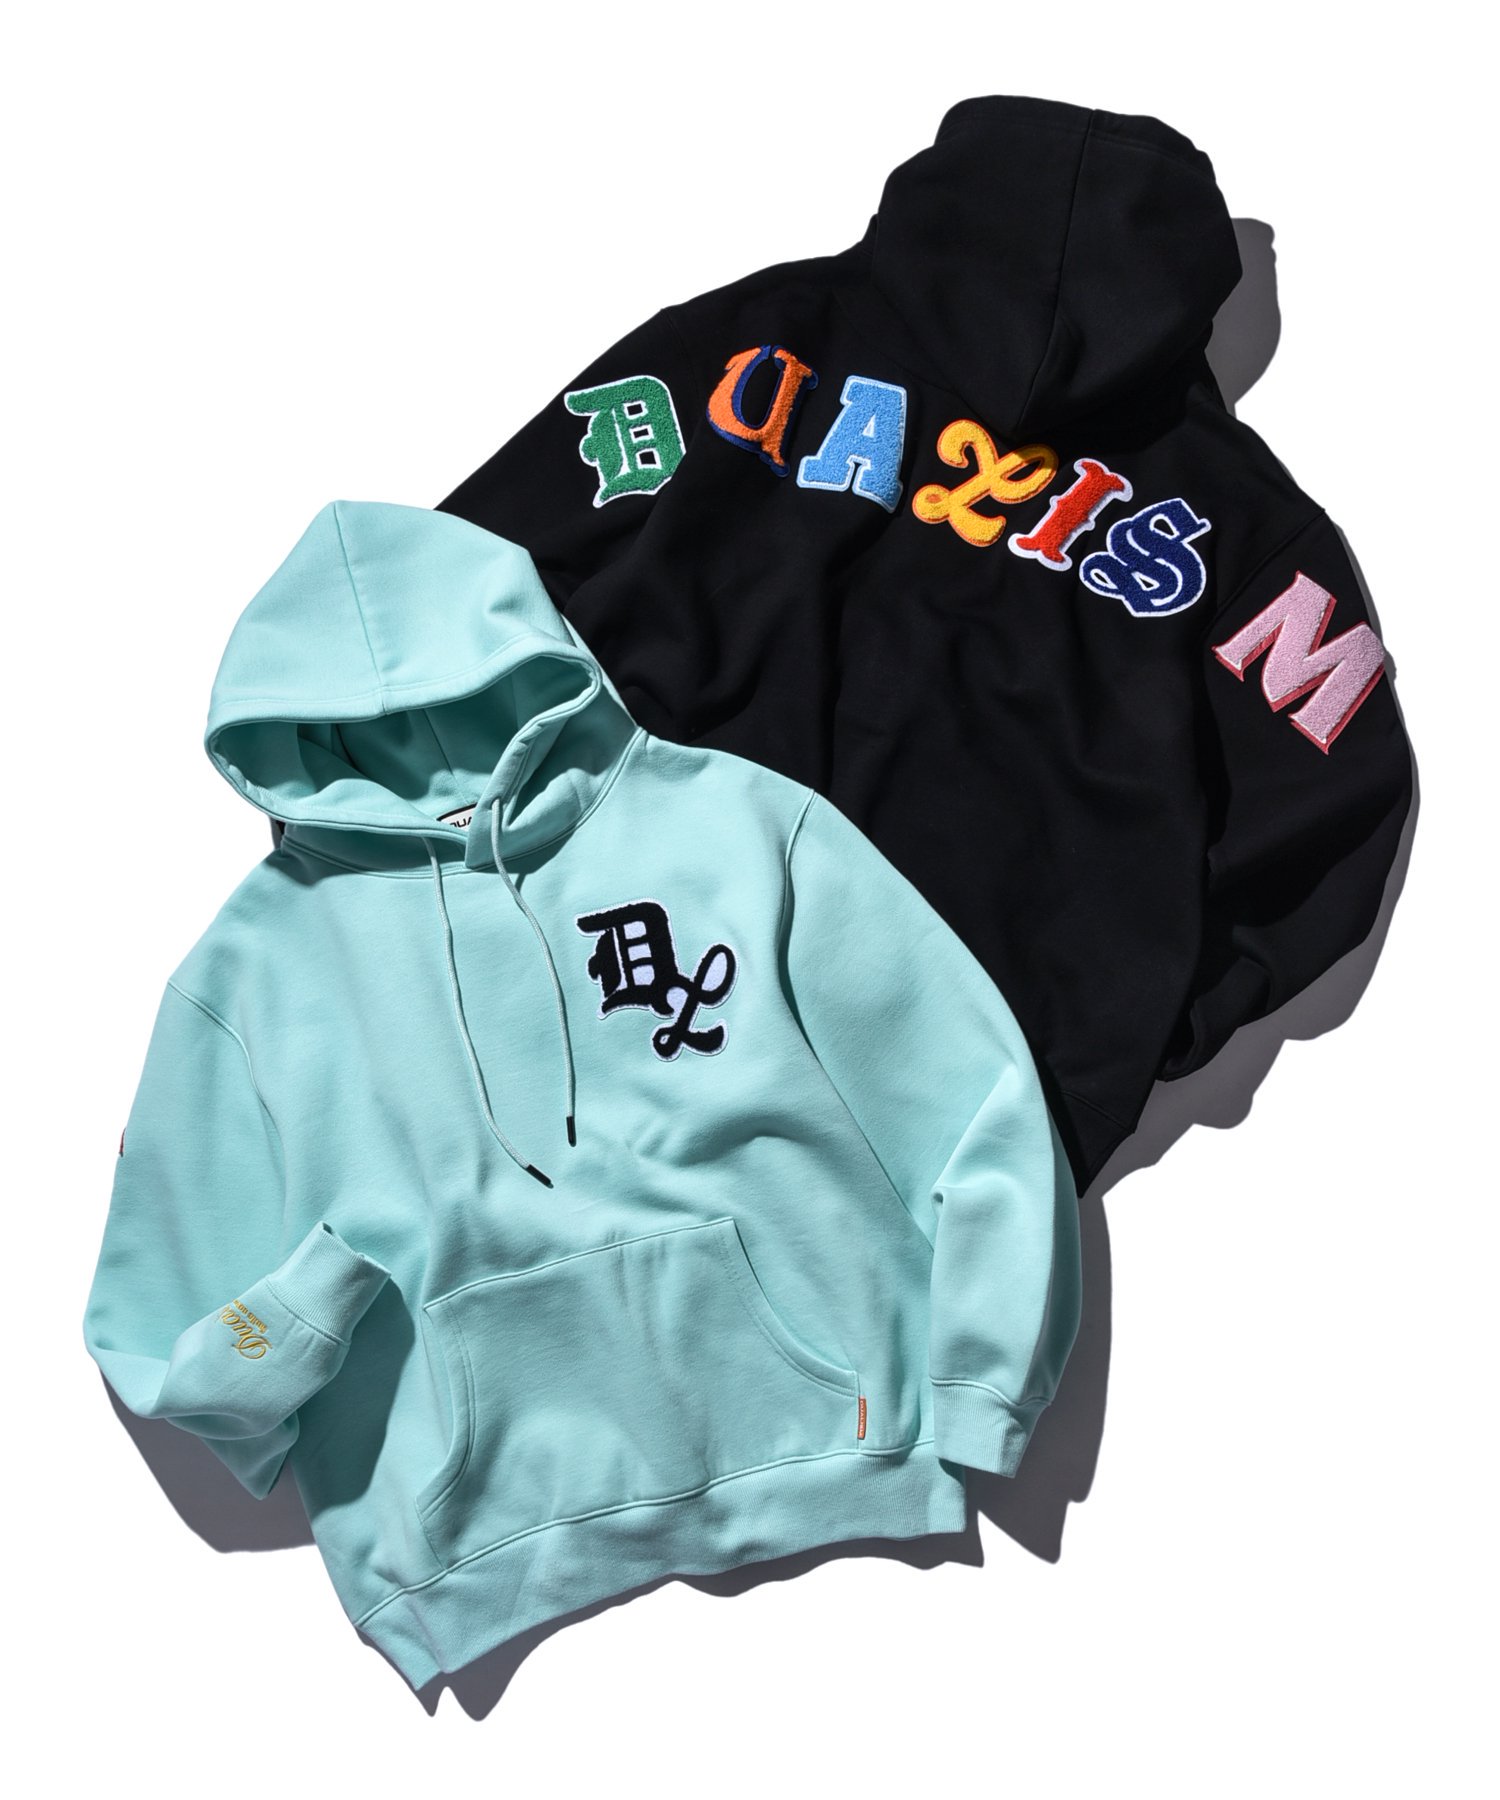 DUALISM/DLSM(デュアリズム) フードパーカー DL MULTI FONT WAPPEN HOODIE 公式通販サイト